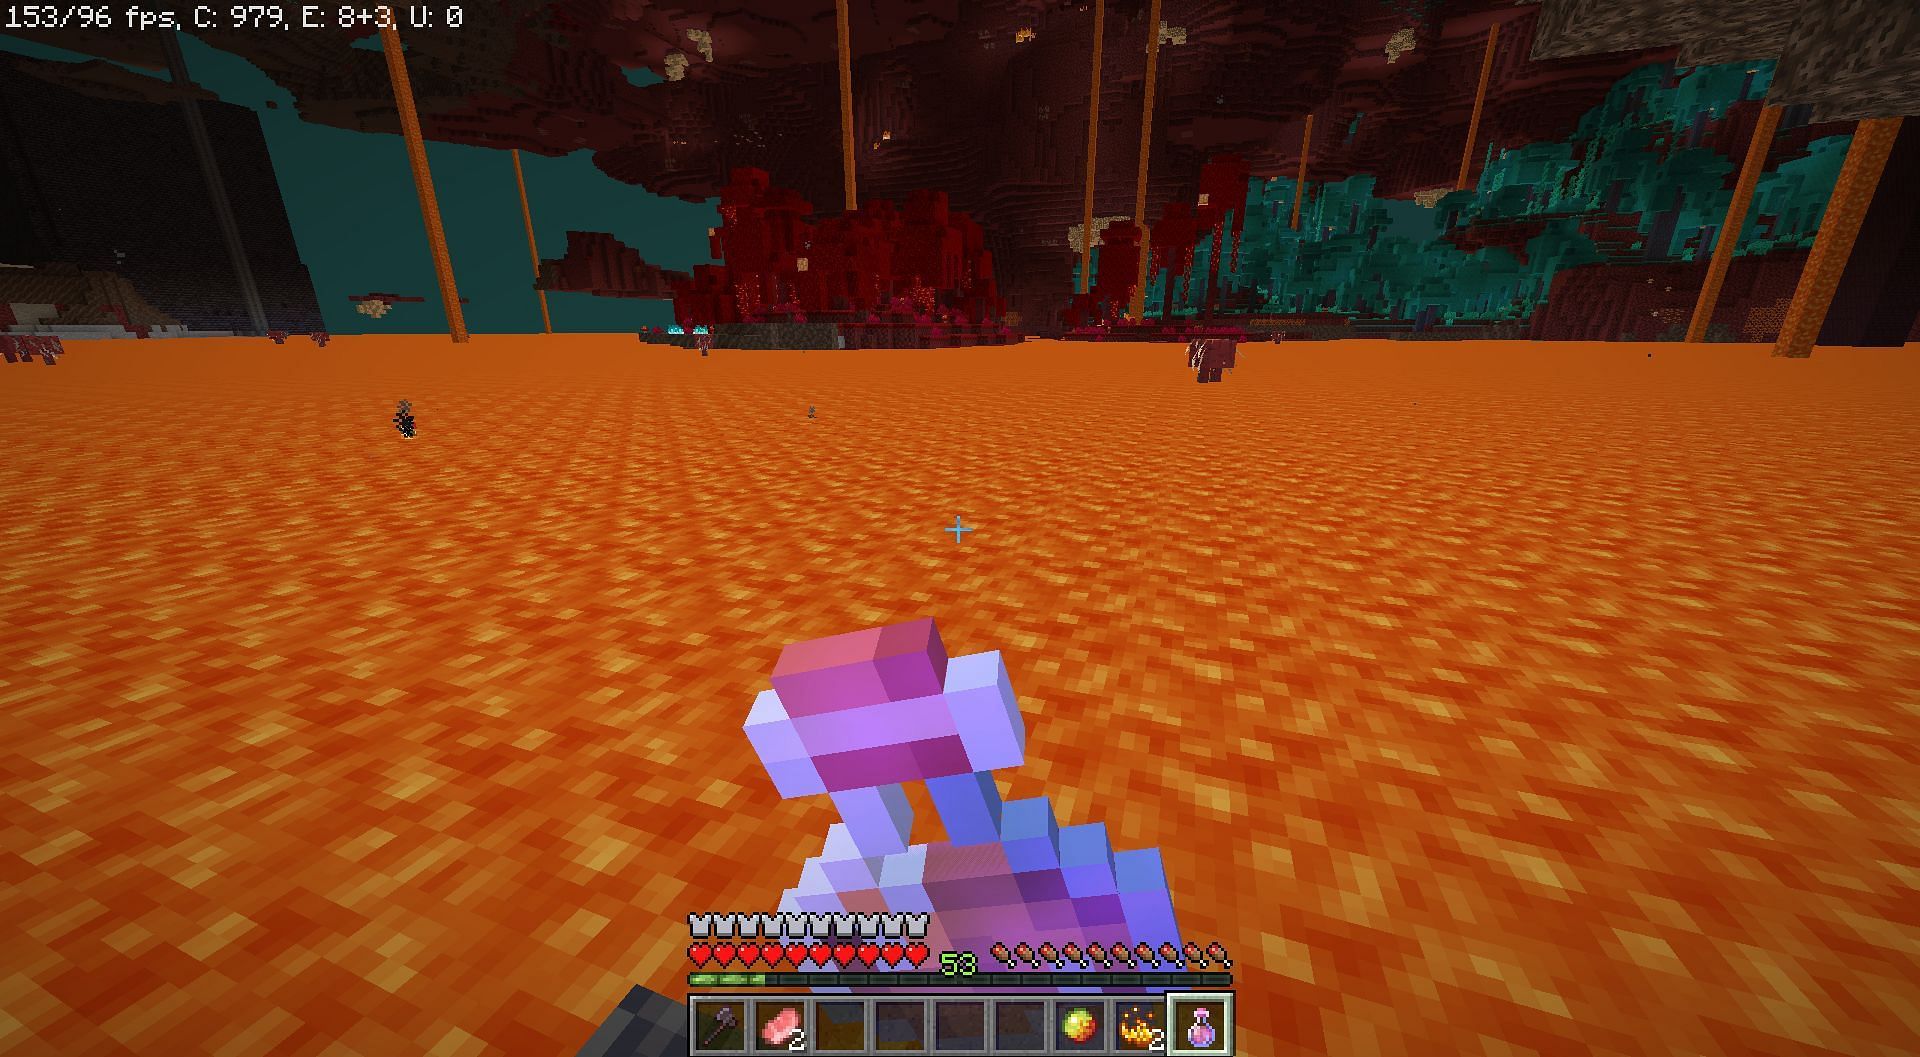 Fire Resistance potions can save players while mining for Ancient Debris in Minecraft (Image via Mojang)